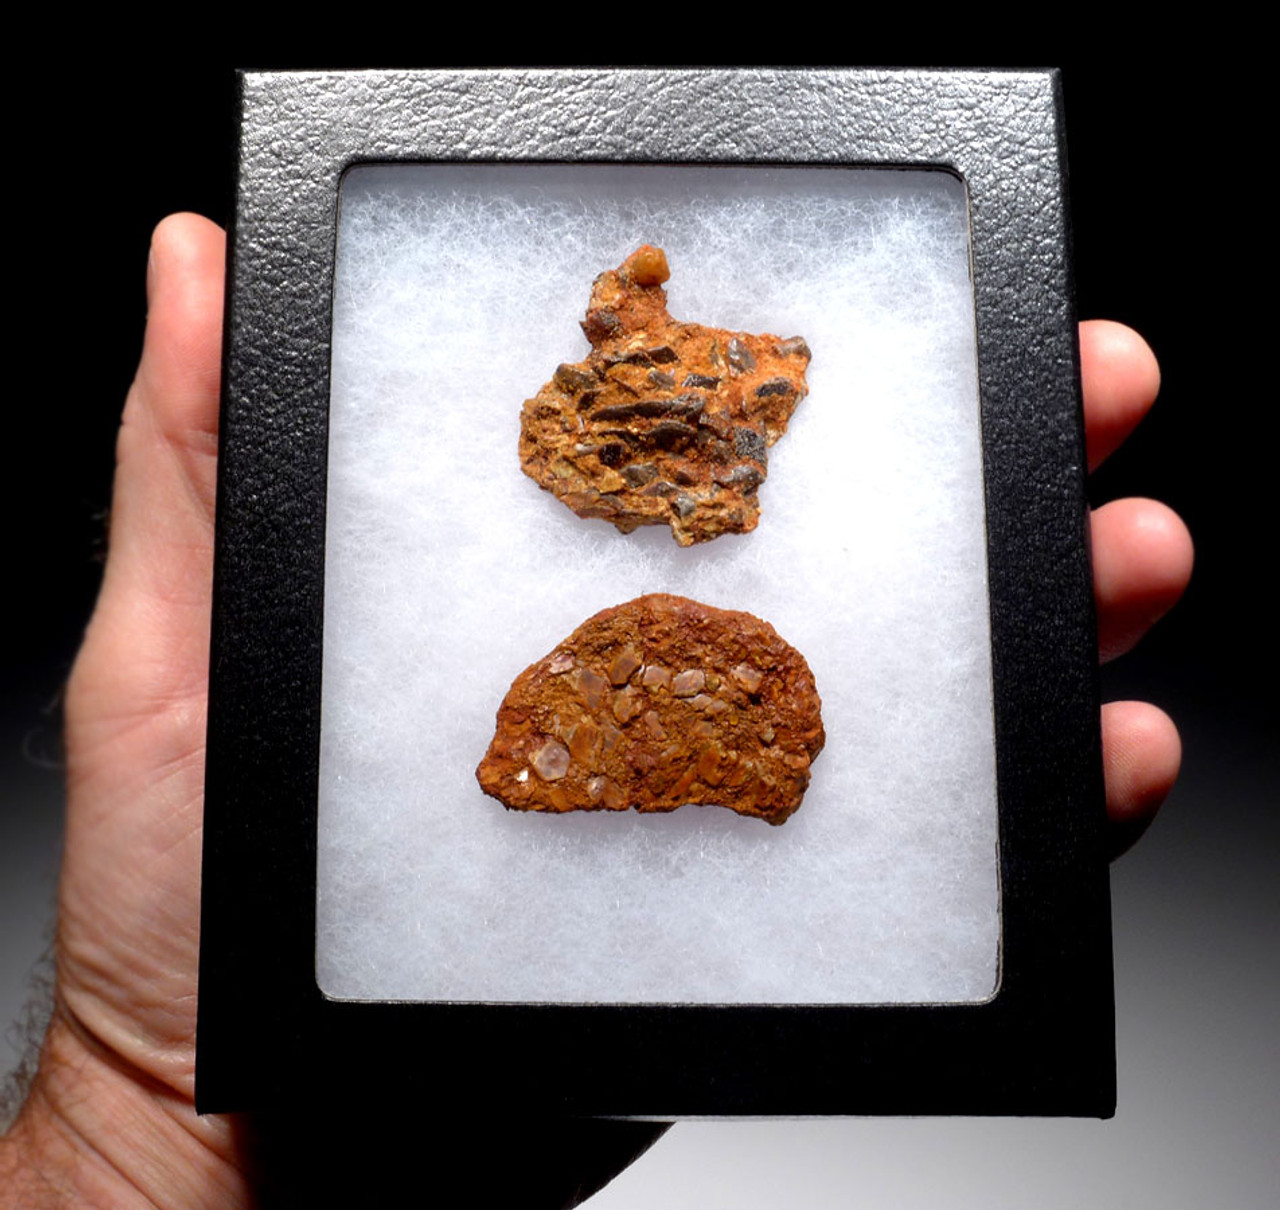 FOSSIL DROMAEOSAUR "RAPTOR" COPROLITES WITH DIGESTED FISH SCALES AND BONES *DT6-292